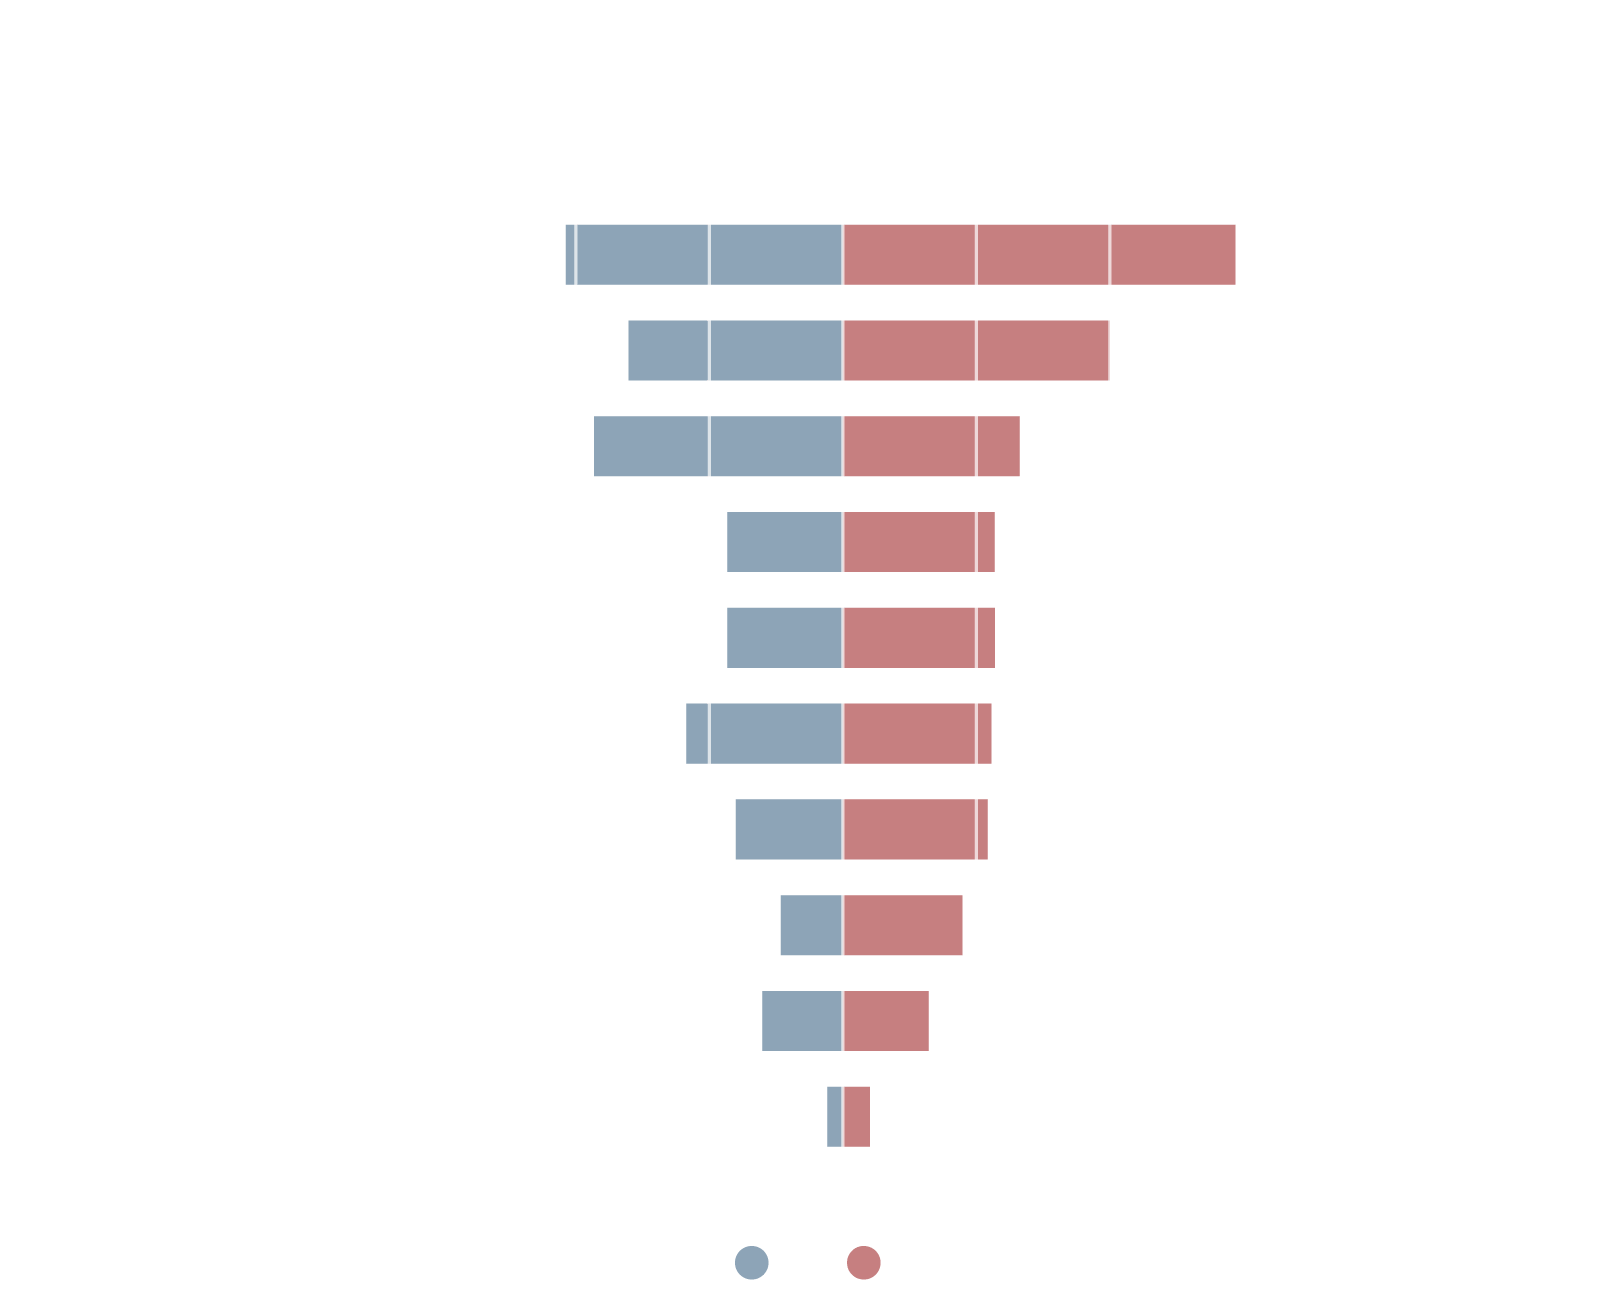 A graph showing the causes of stress for American men and women, based on a Compare the Market survey